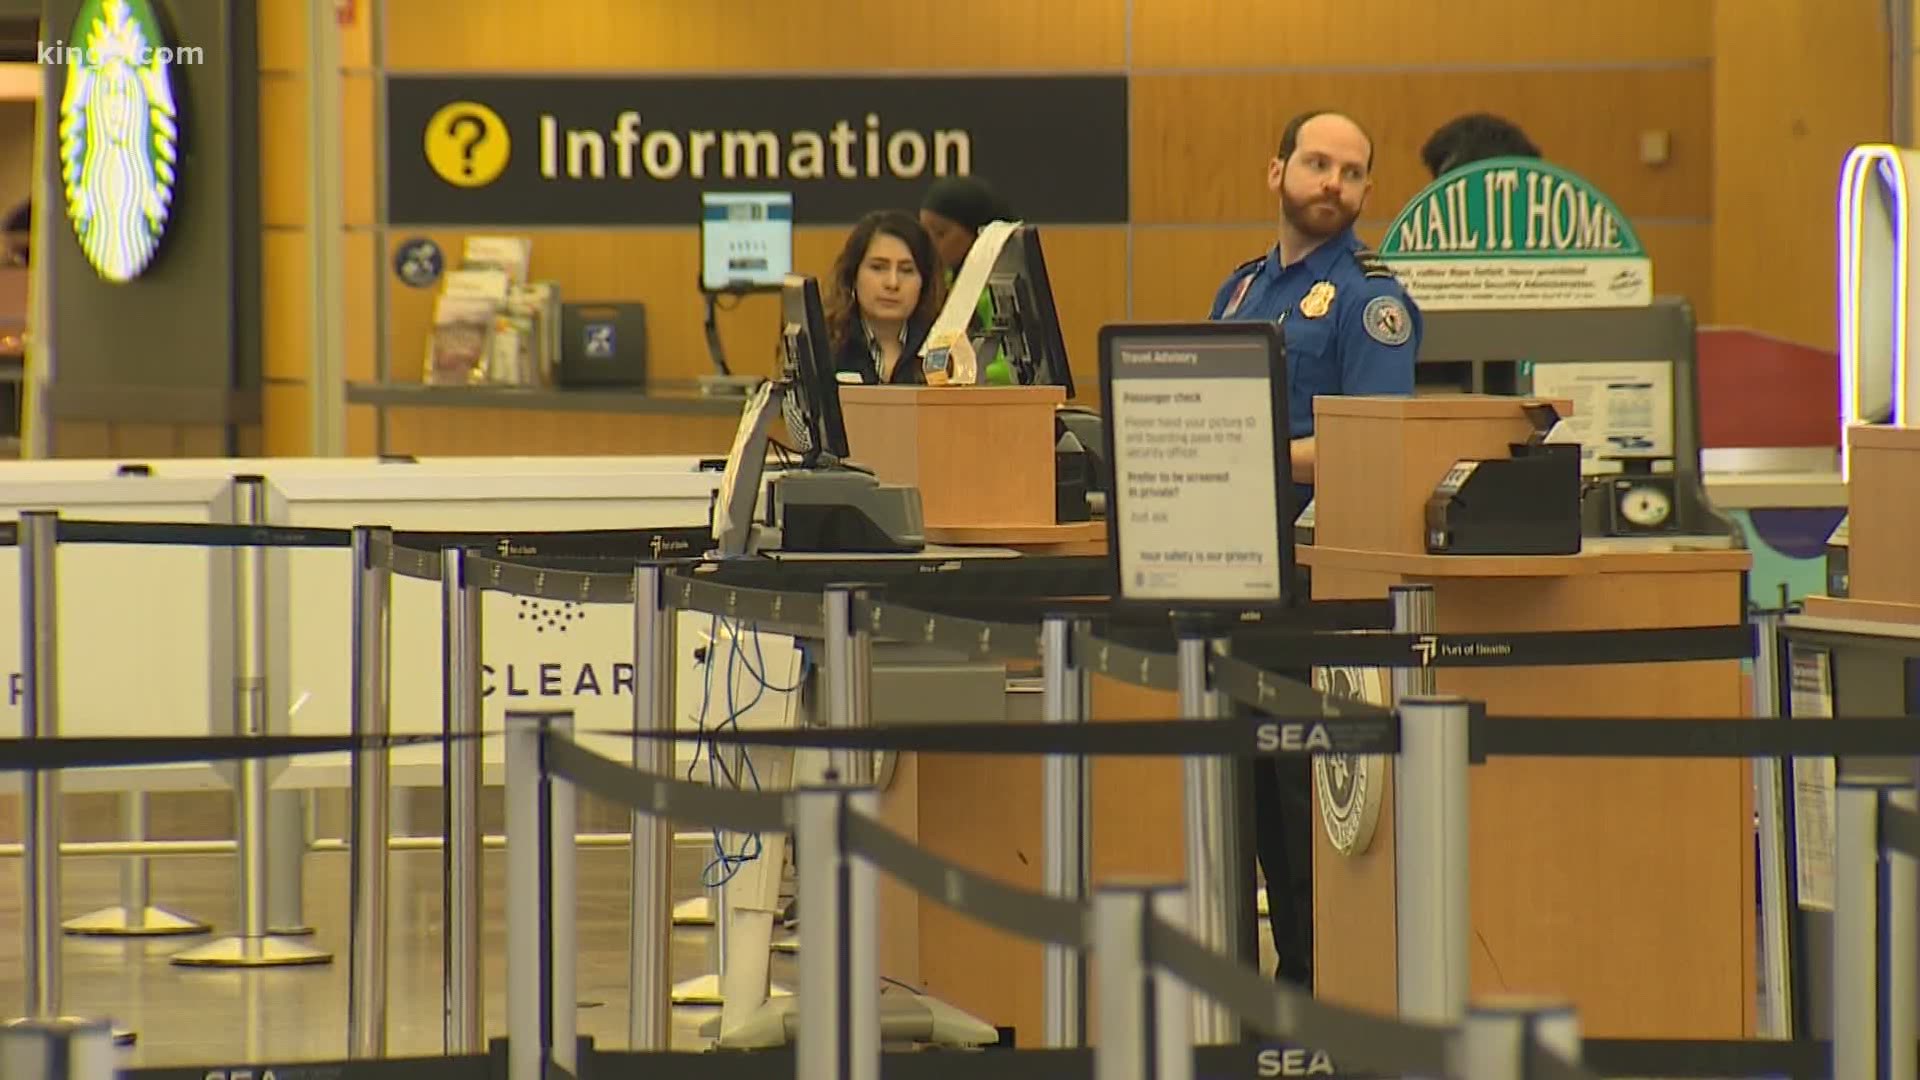 Port of Seattle officials say at least 1,600 employees from Sea-Tac Airport have been furloughed or laid off so far due to the coronavirus pandemic.